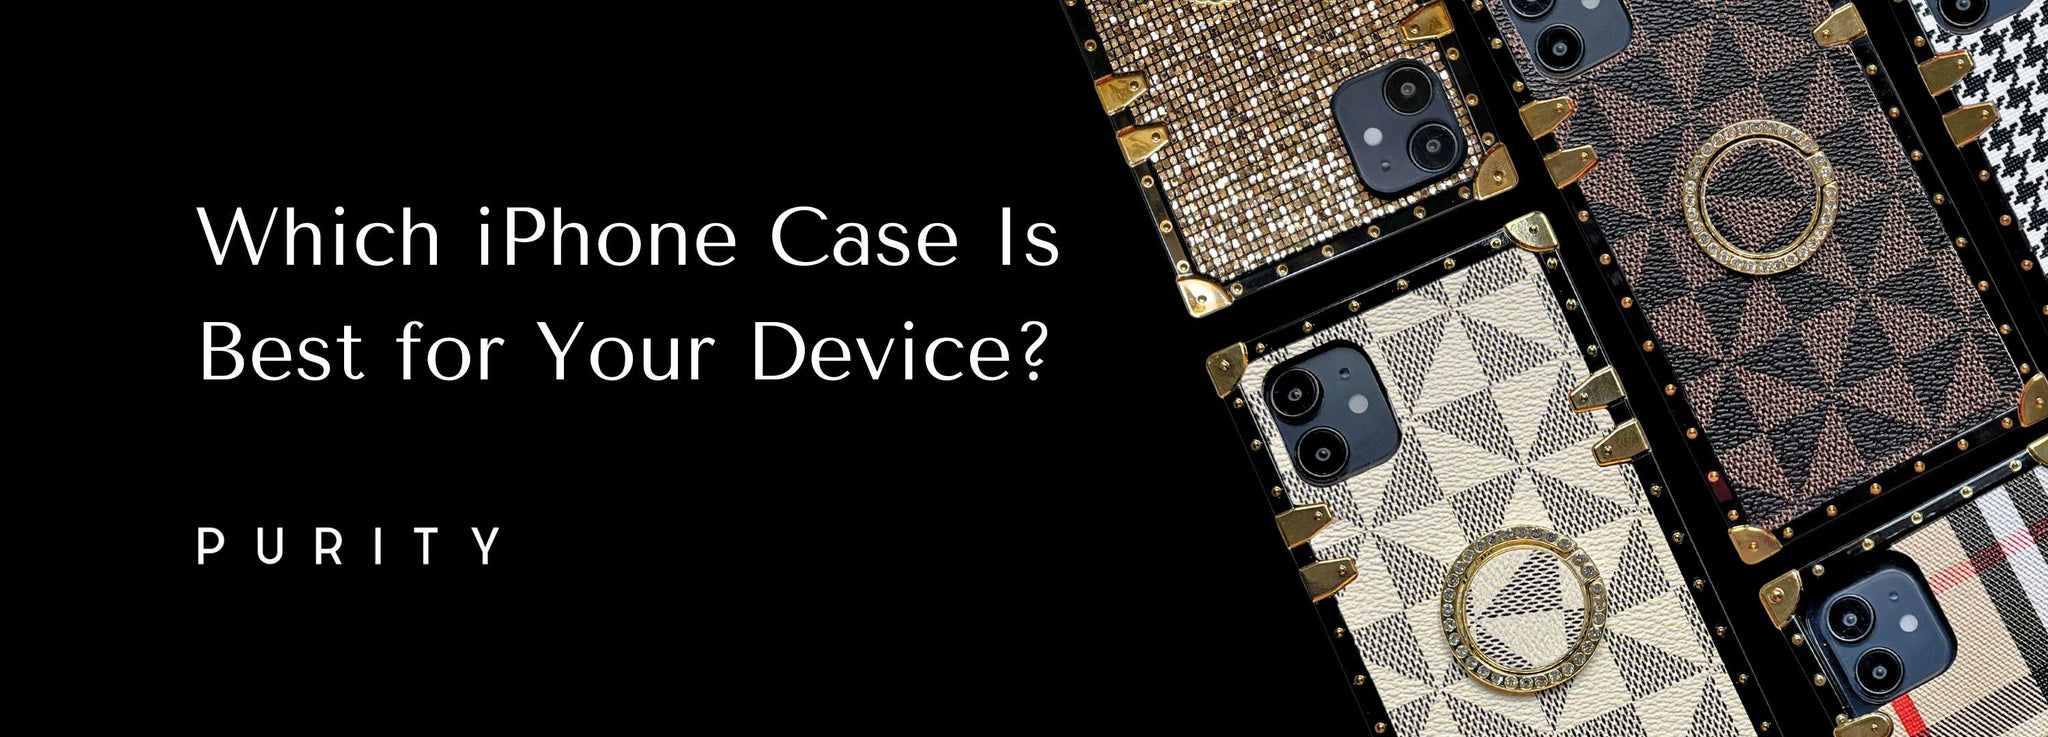 Which iPhone case is best for your device?